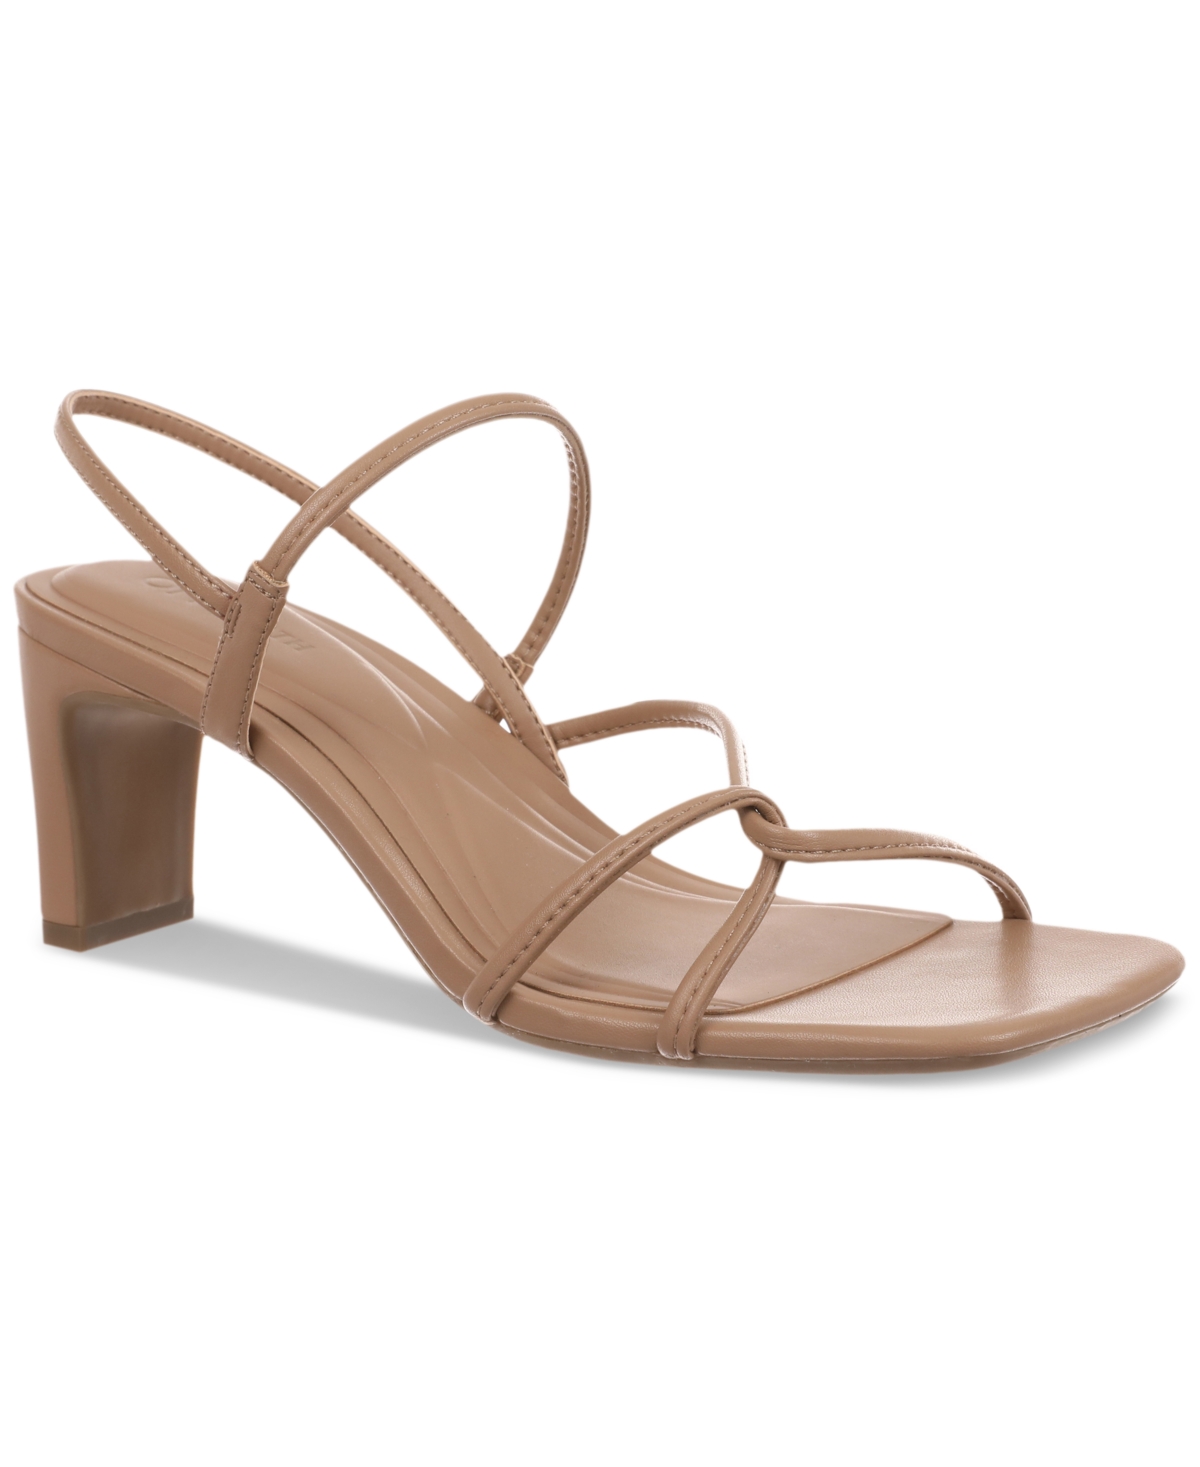 Women's Cloverr Strappy Block-Heel Sandals, Created for Macy's - Green Smooth